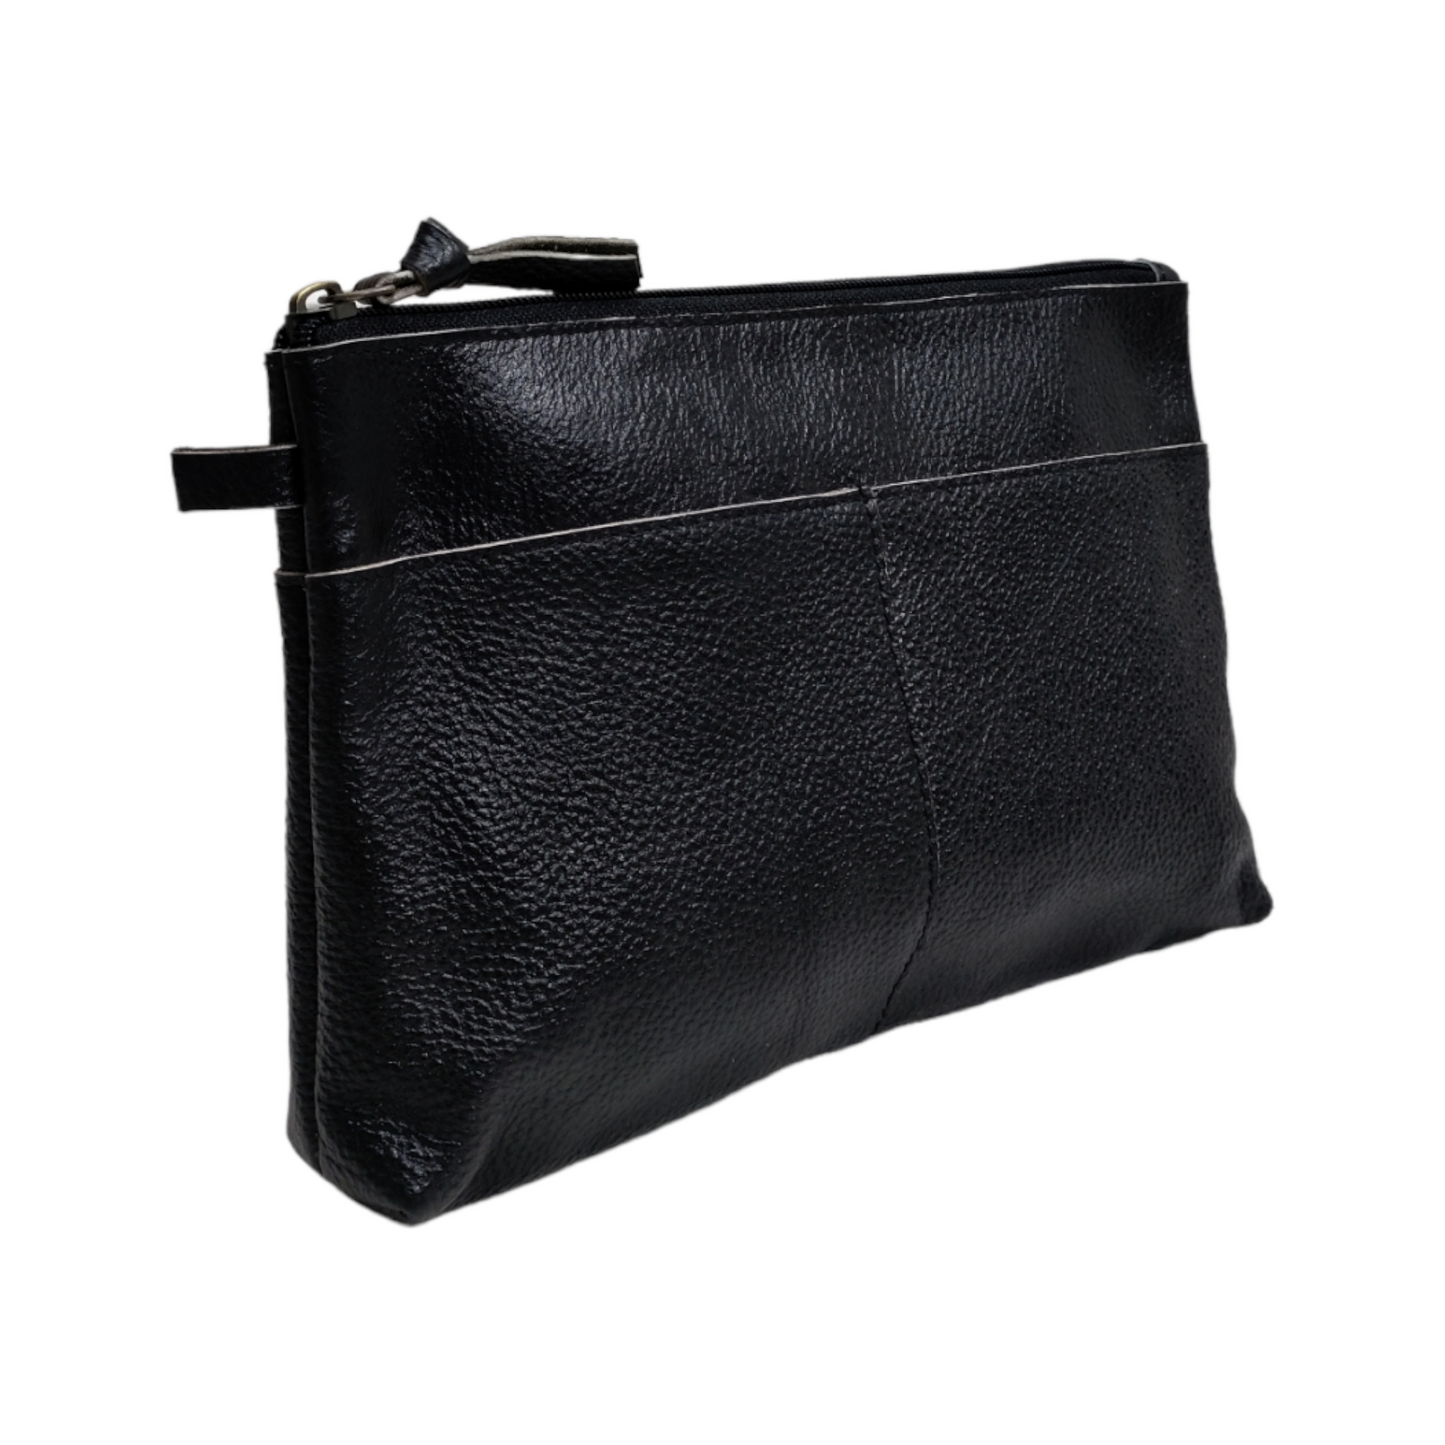 Black Leather Cosmetic Bag Leather Zipper Pouch Leather Make Up Bag Leather Toiletry Pouch